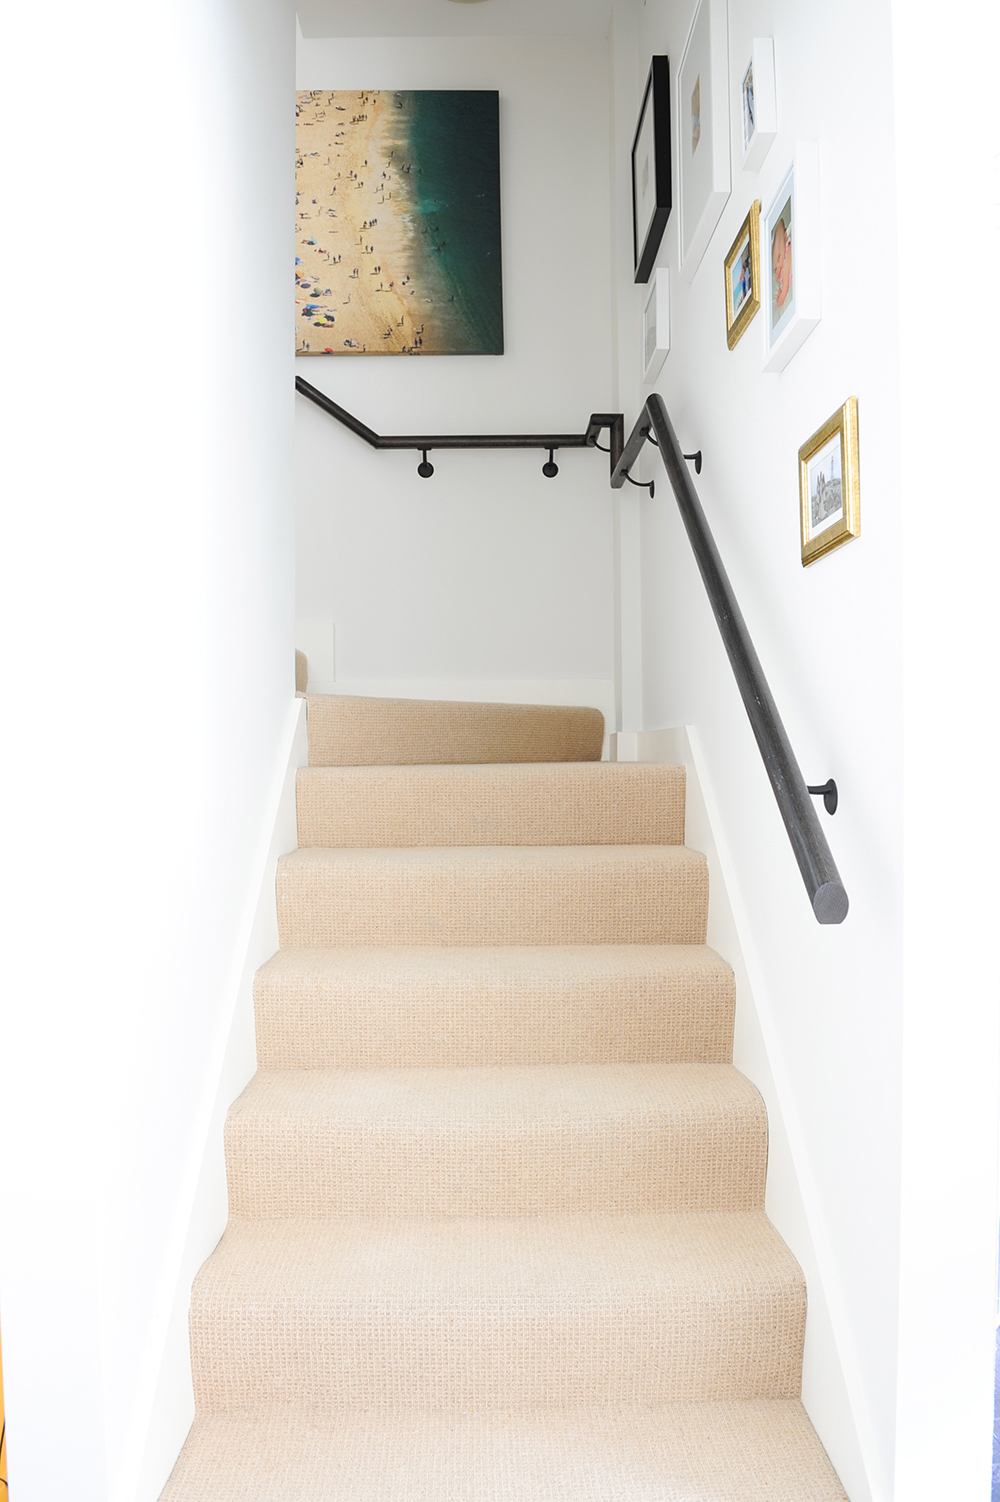 A carpeted staircase lined with artwork and photography.